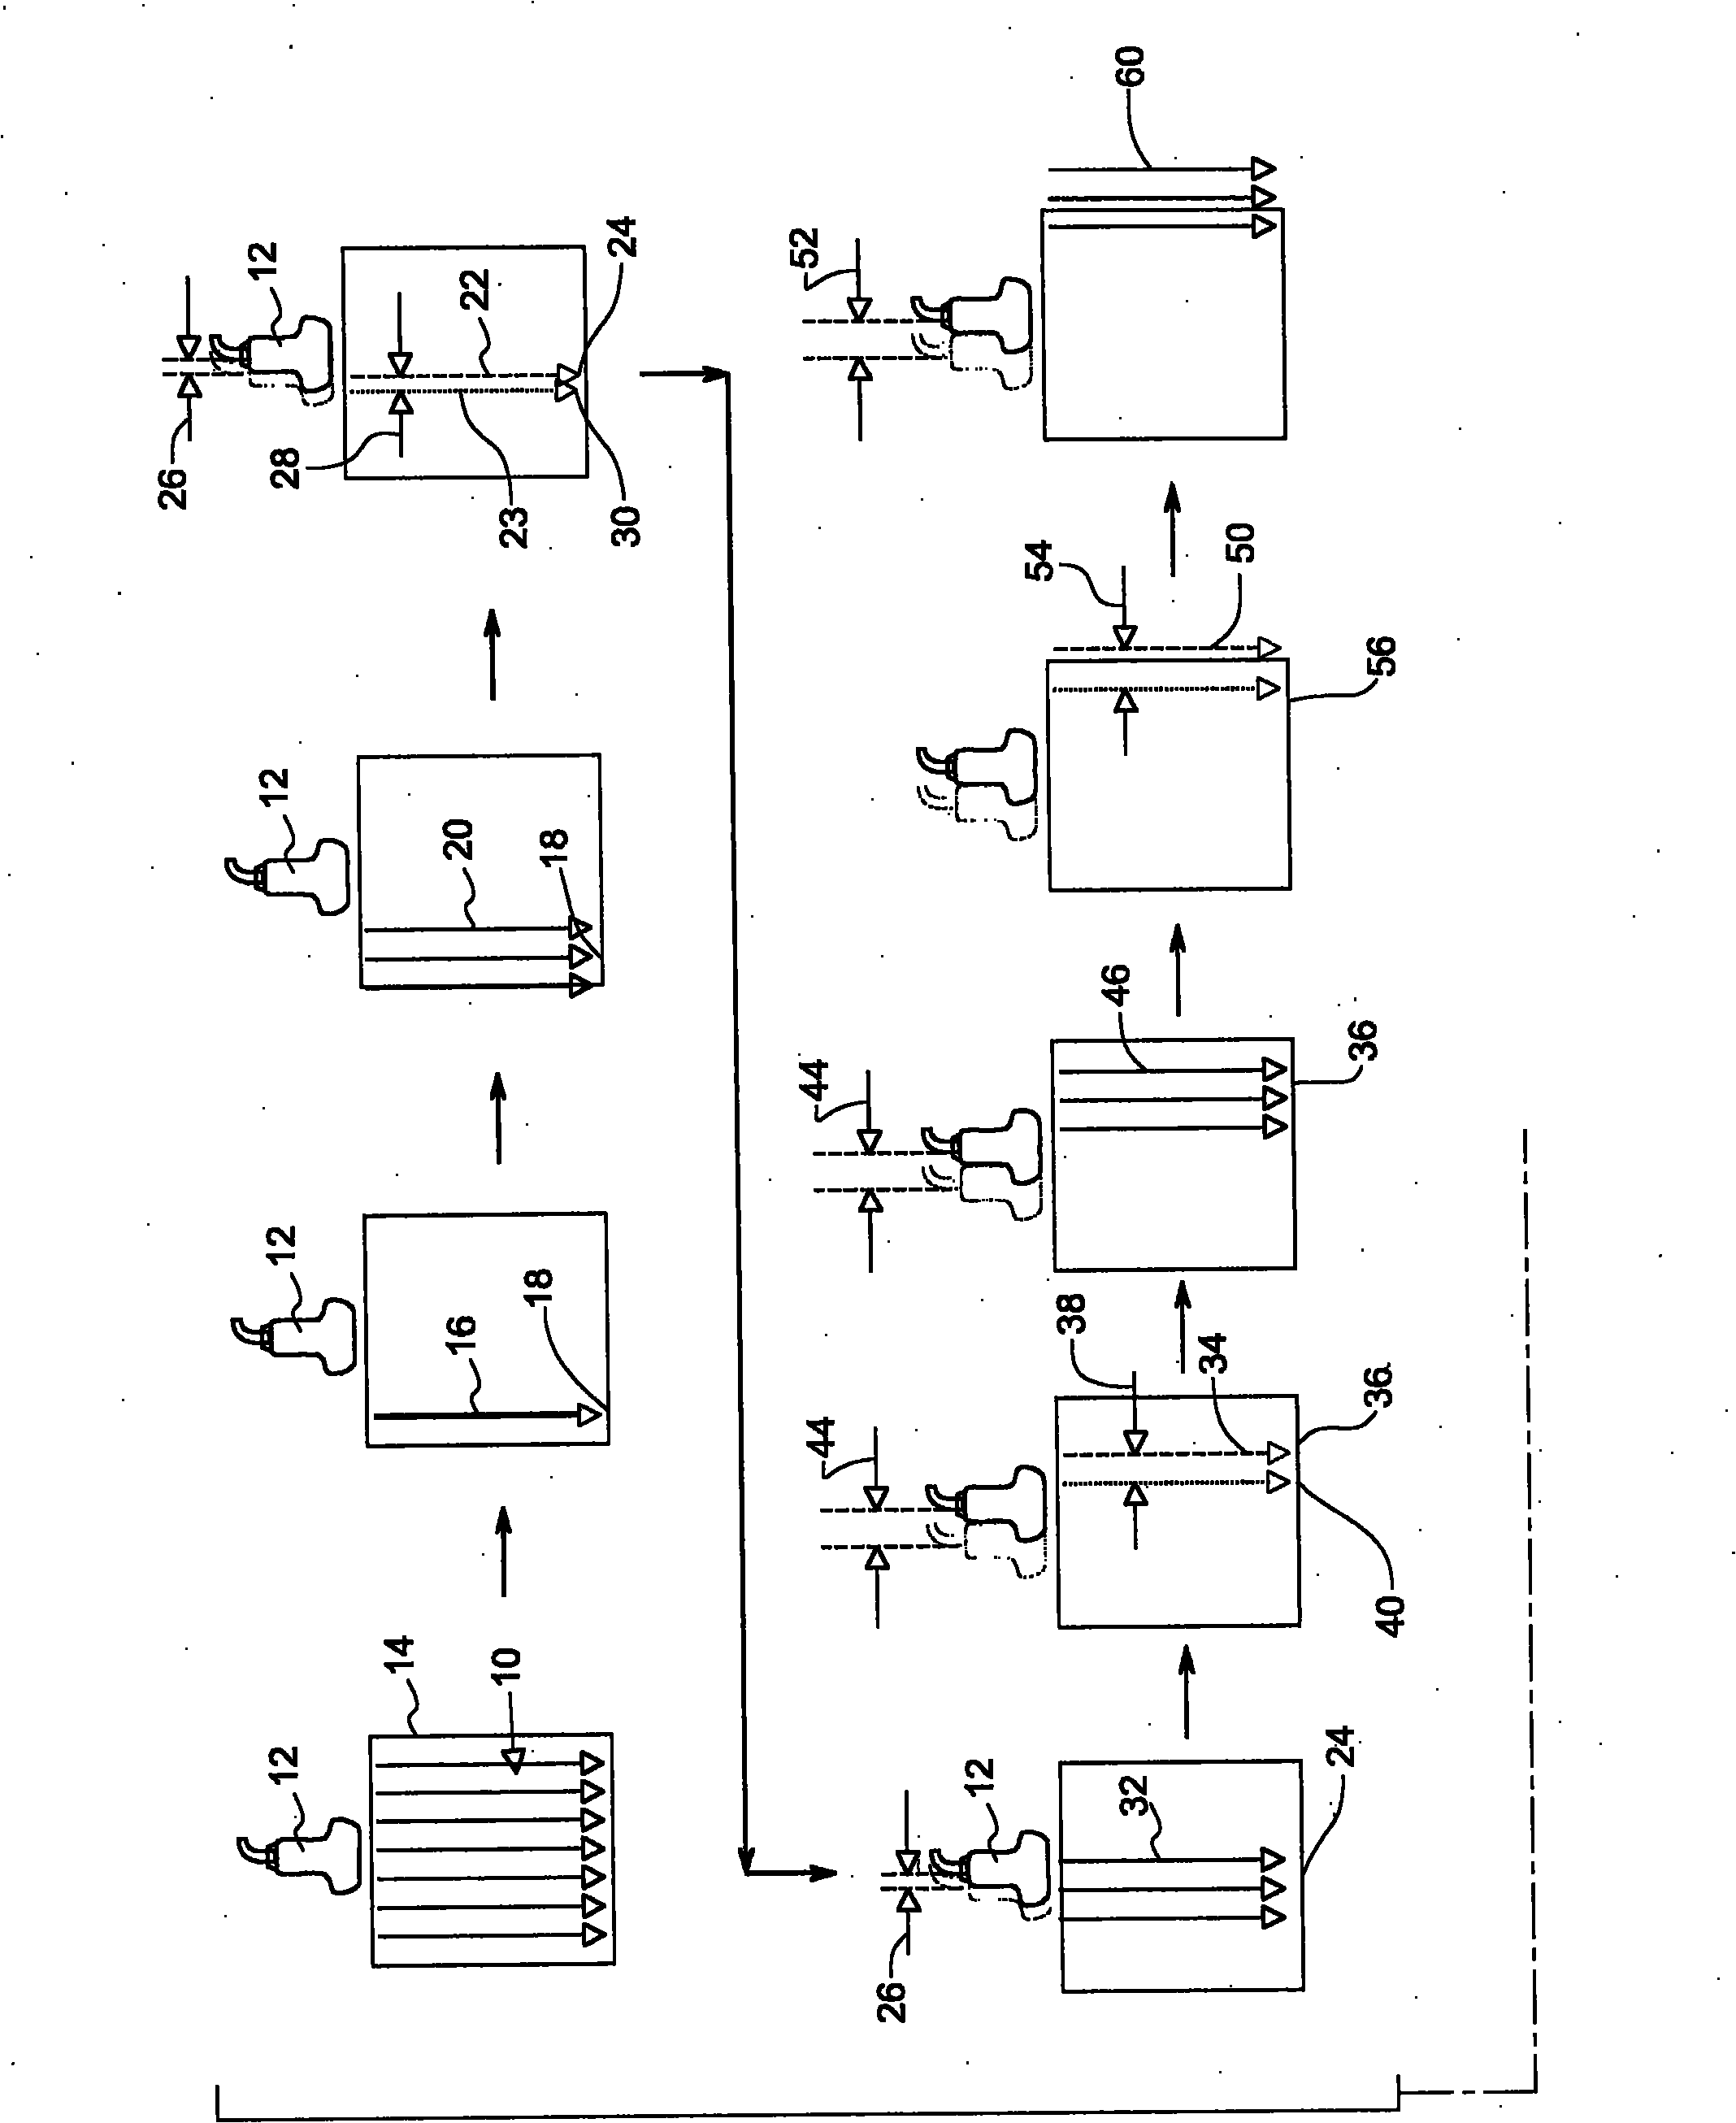 Systems and methods for ultrasound imaging with reduced thermal dose